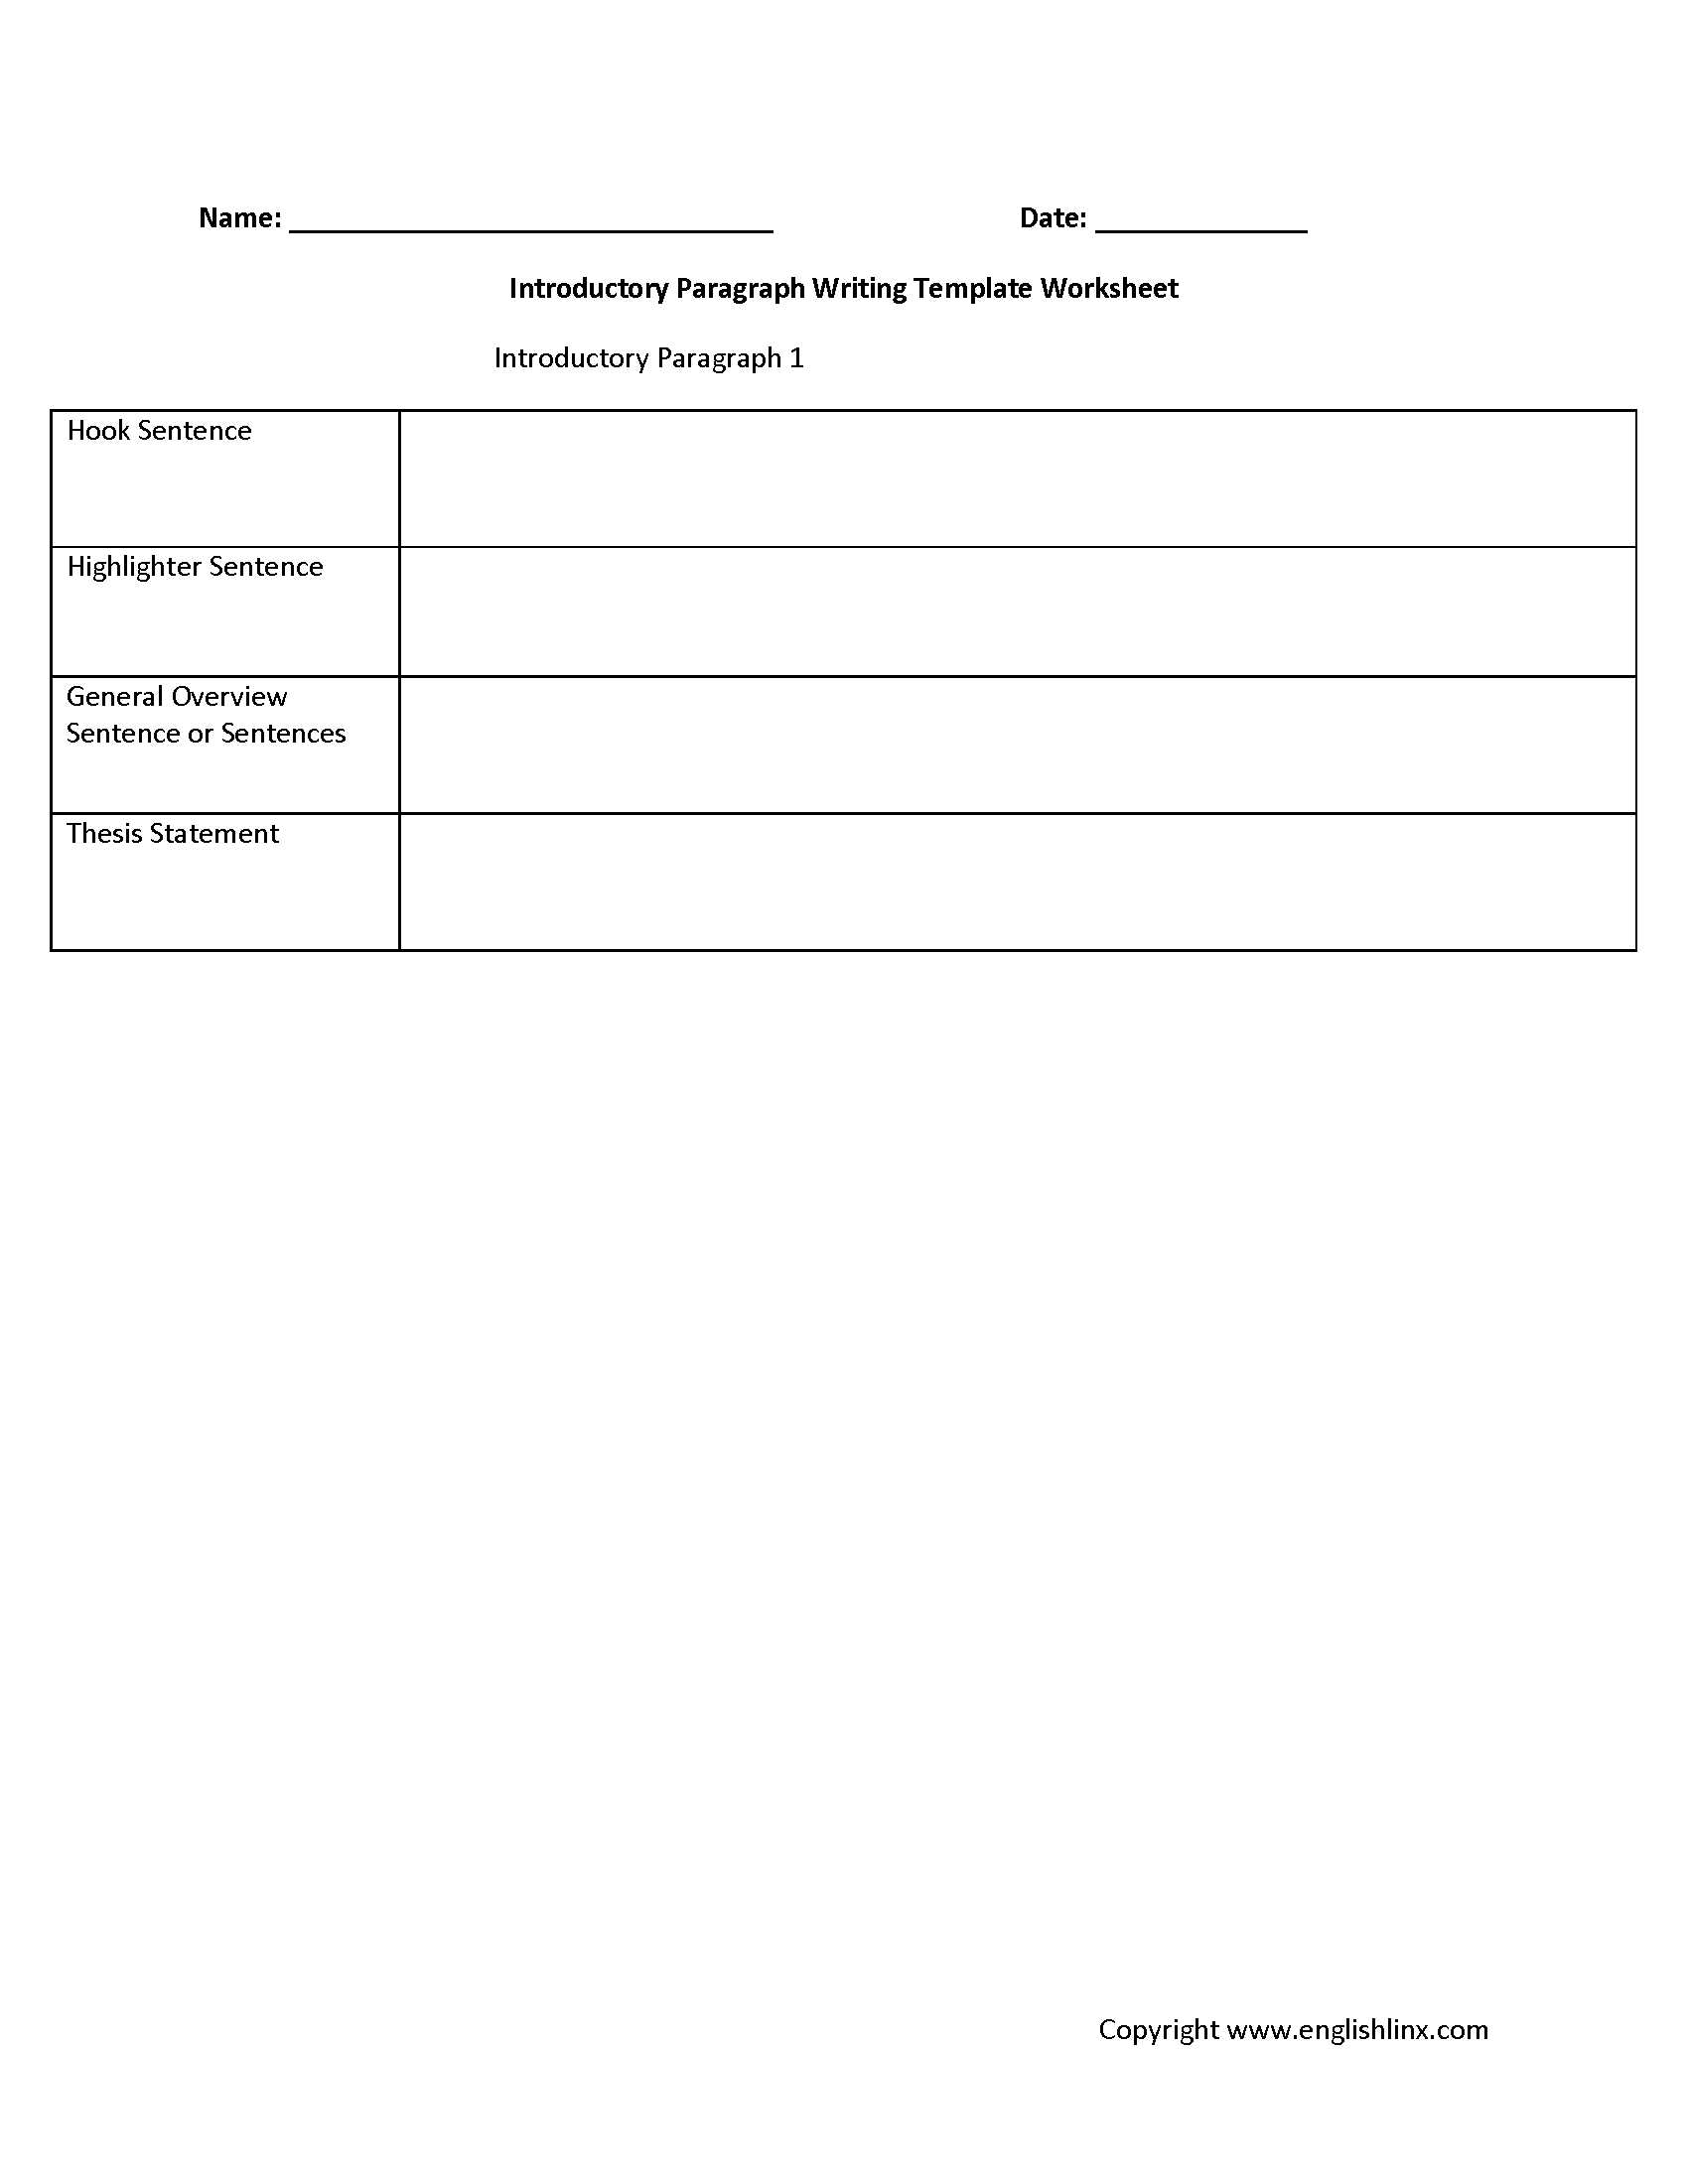 Paragraph Writing Worksheets together with Introductory Paragraph Writing Template Worksheet